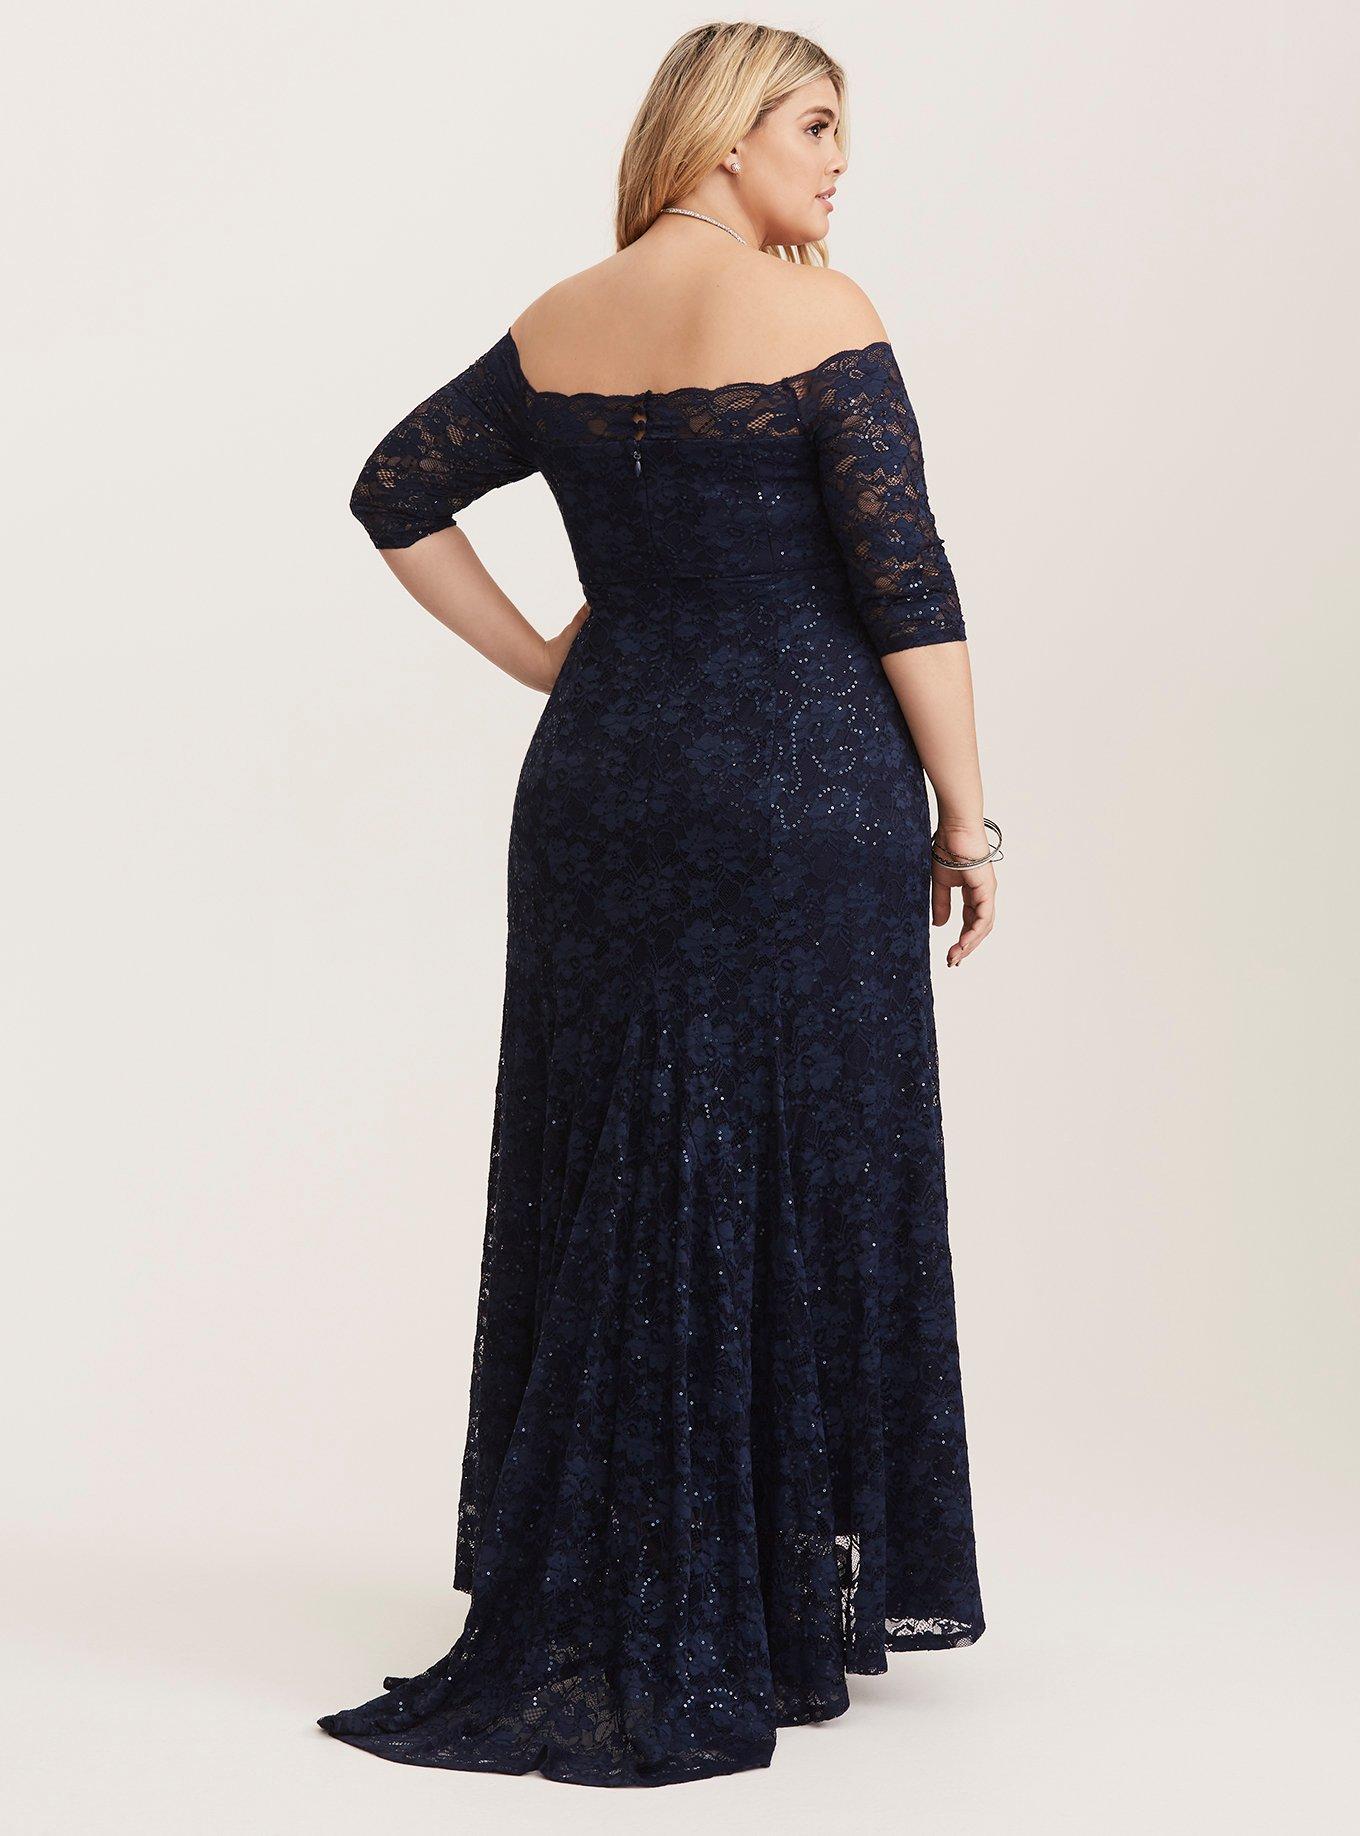 Plus Size - Special Occasion Navy Sequin Lace Off Shoulder Gown - Torrid